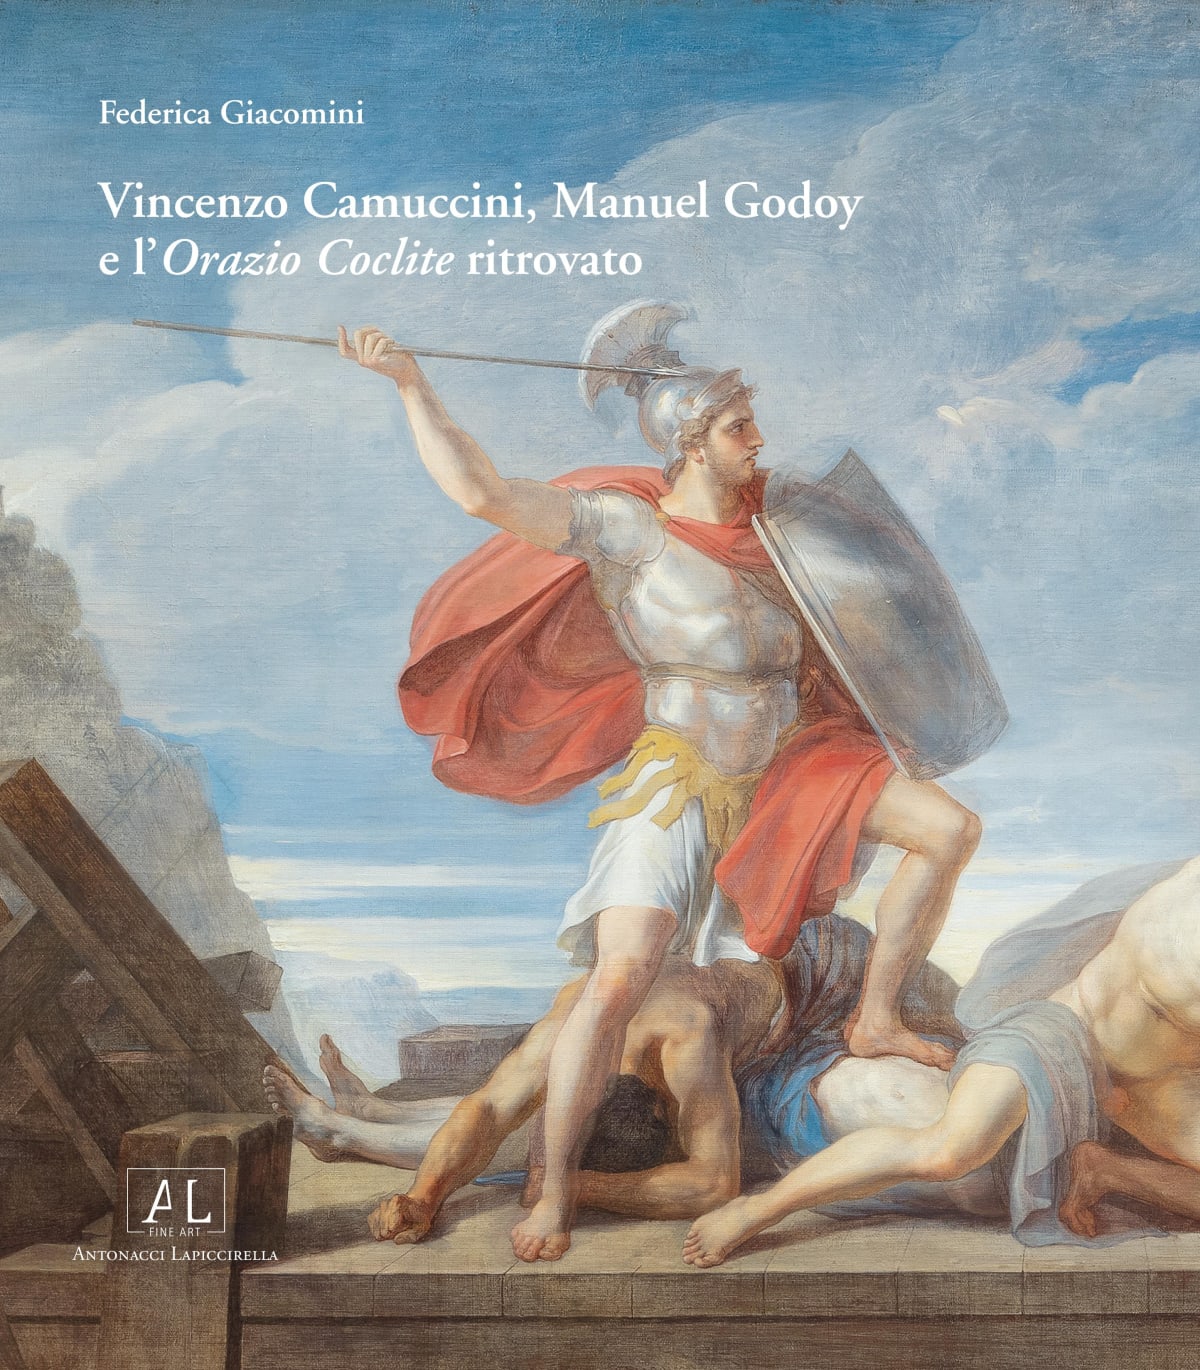 Vincenzo Camuccini, Manuel Godoy and the rediscovery of the Horatius Cocles 